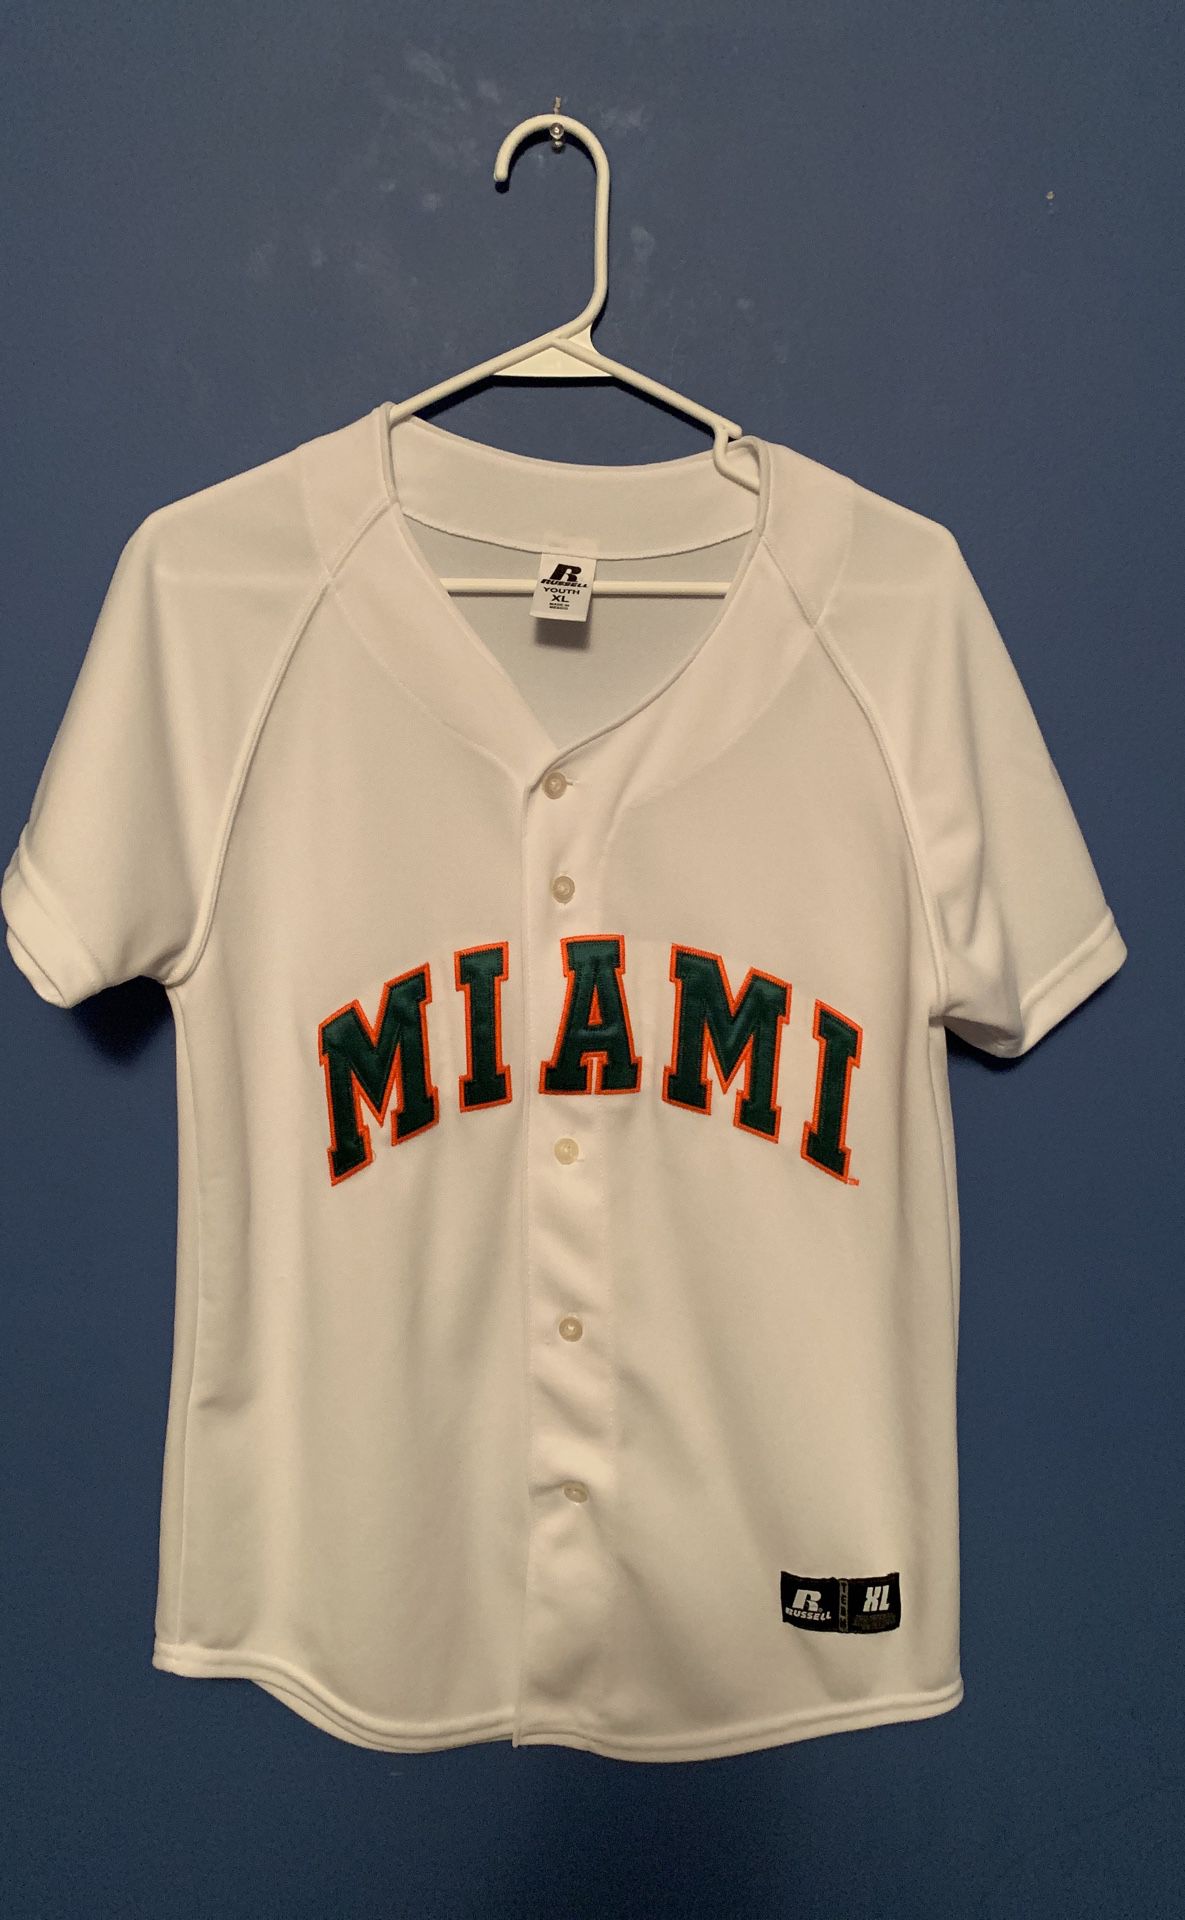 Russell CWS Miami Baseball Jersey